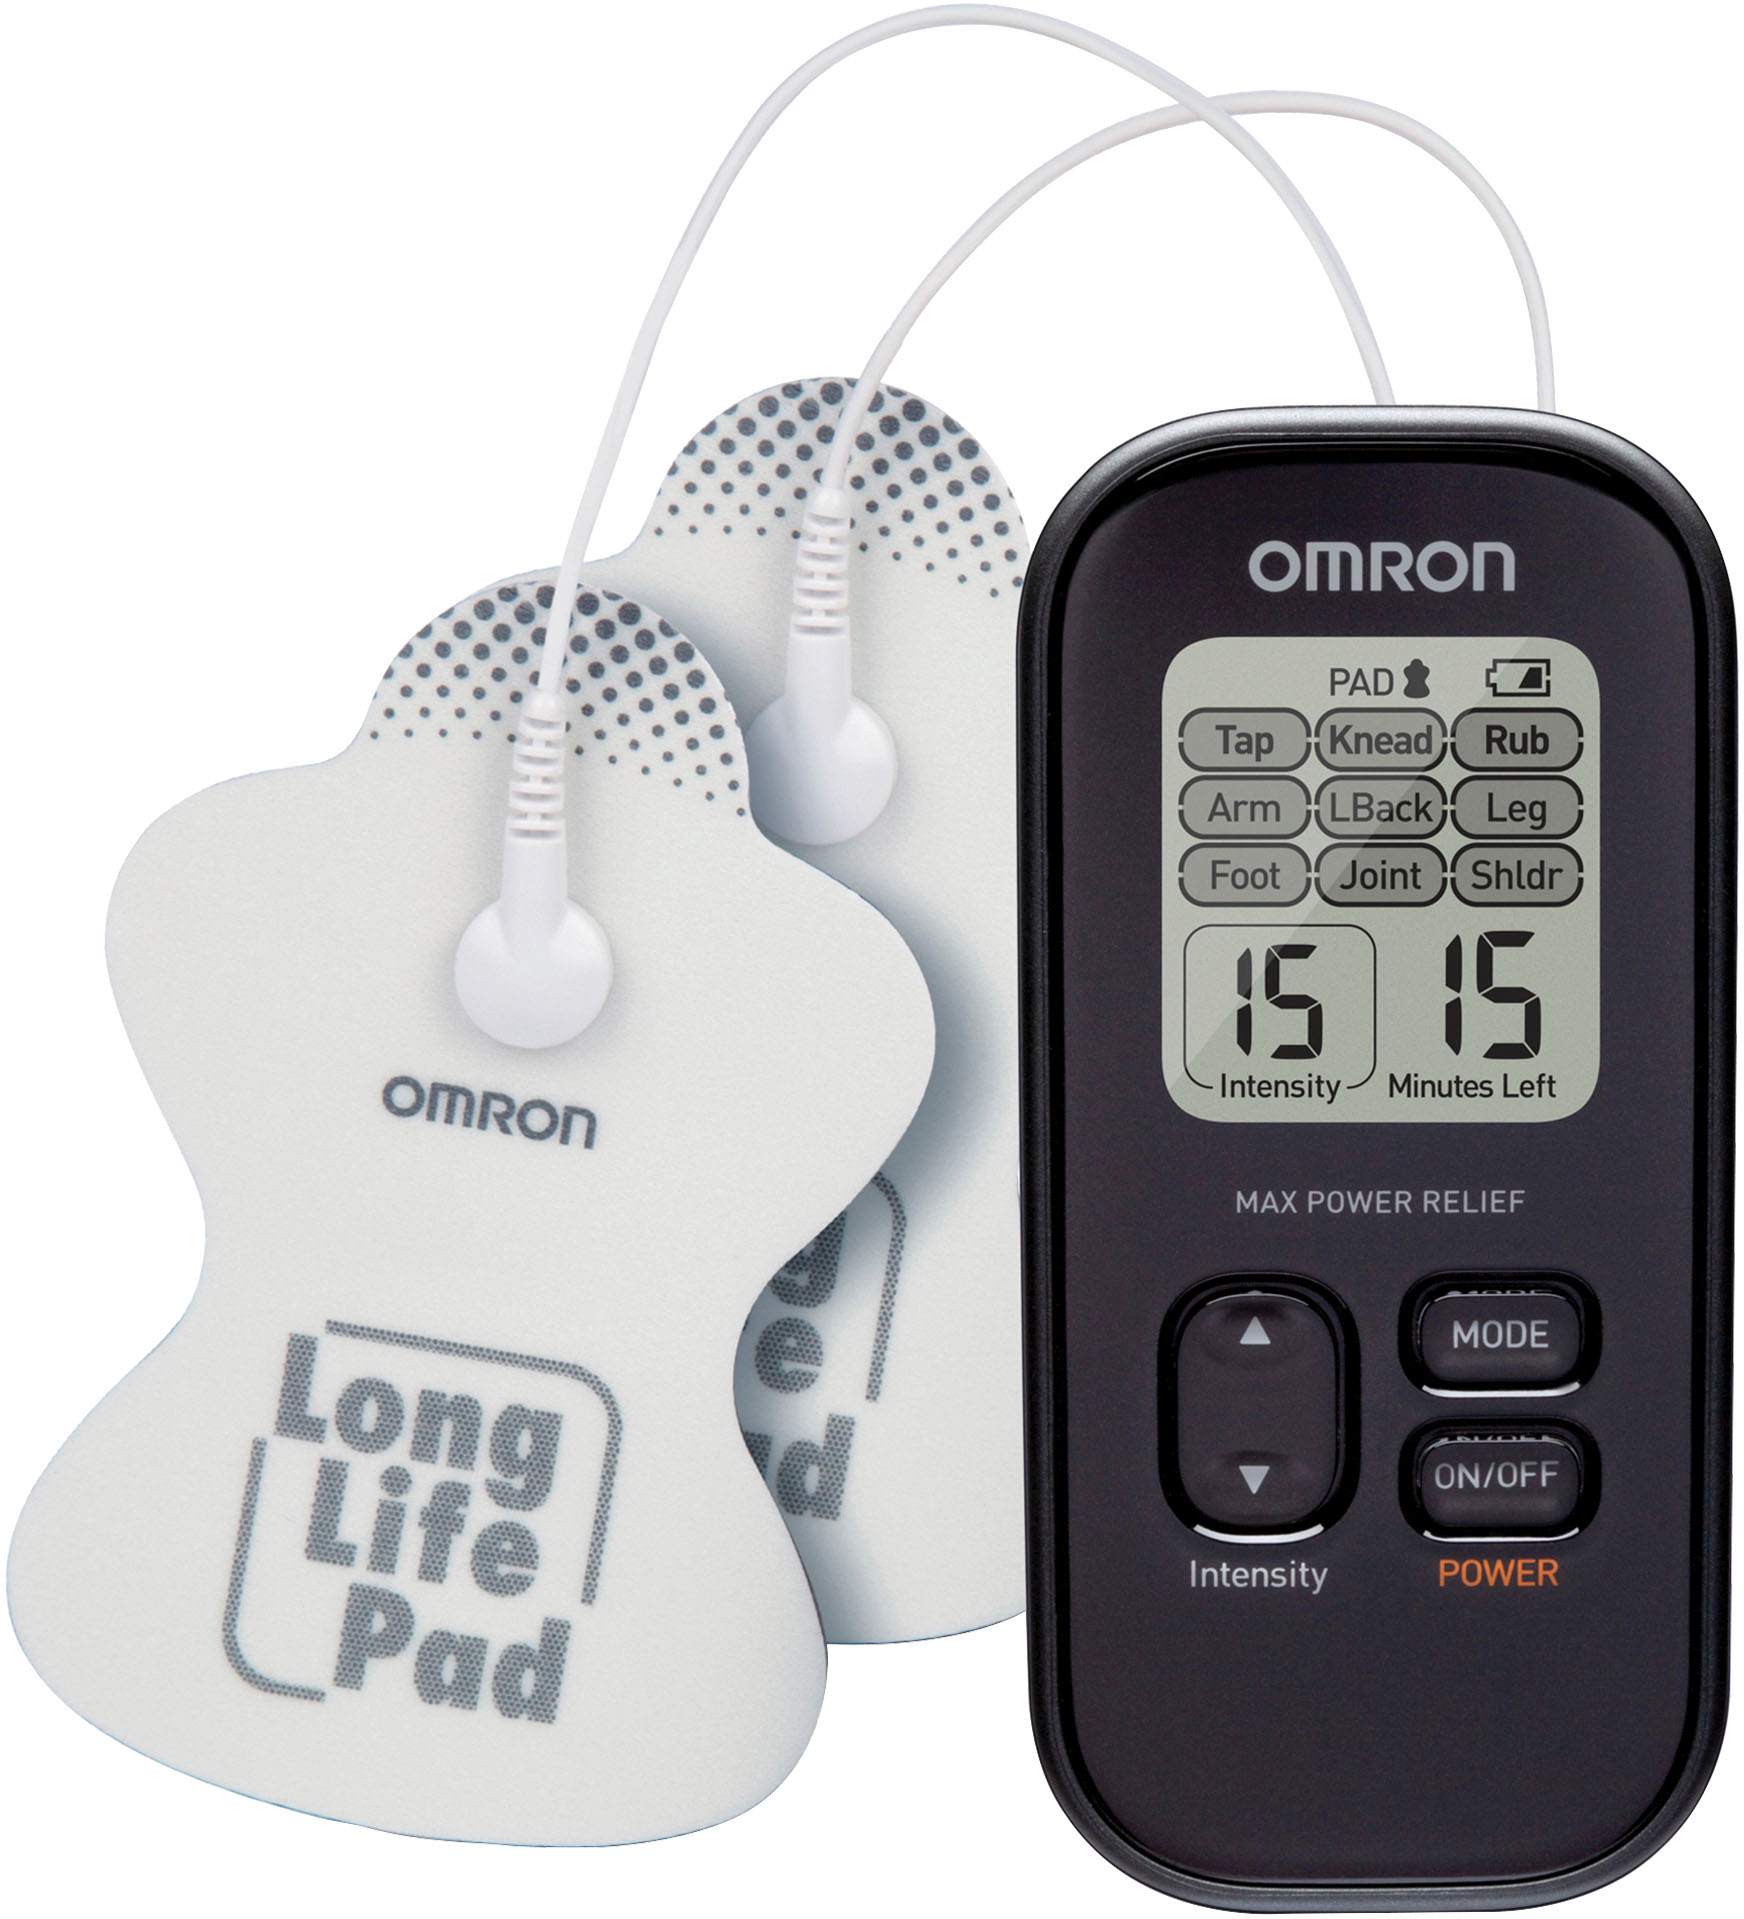 Omron - Max Power Relief TENS Unit - Black